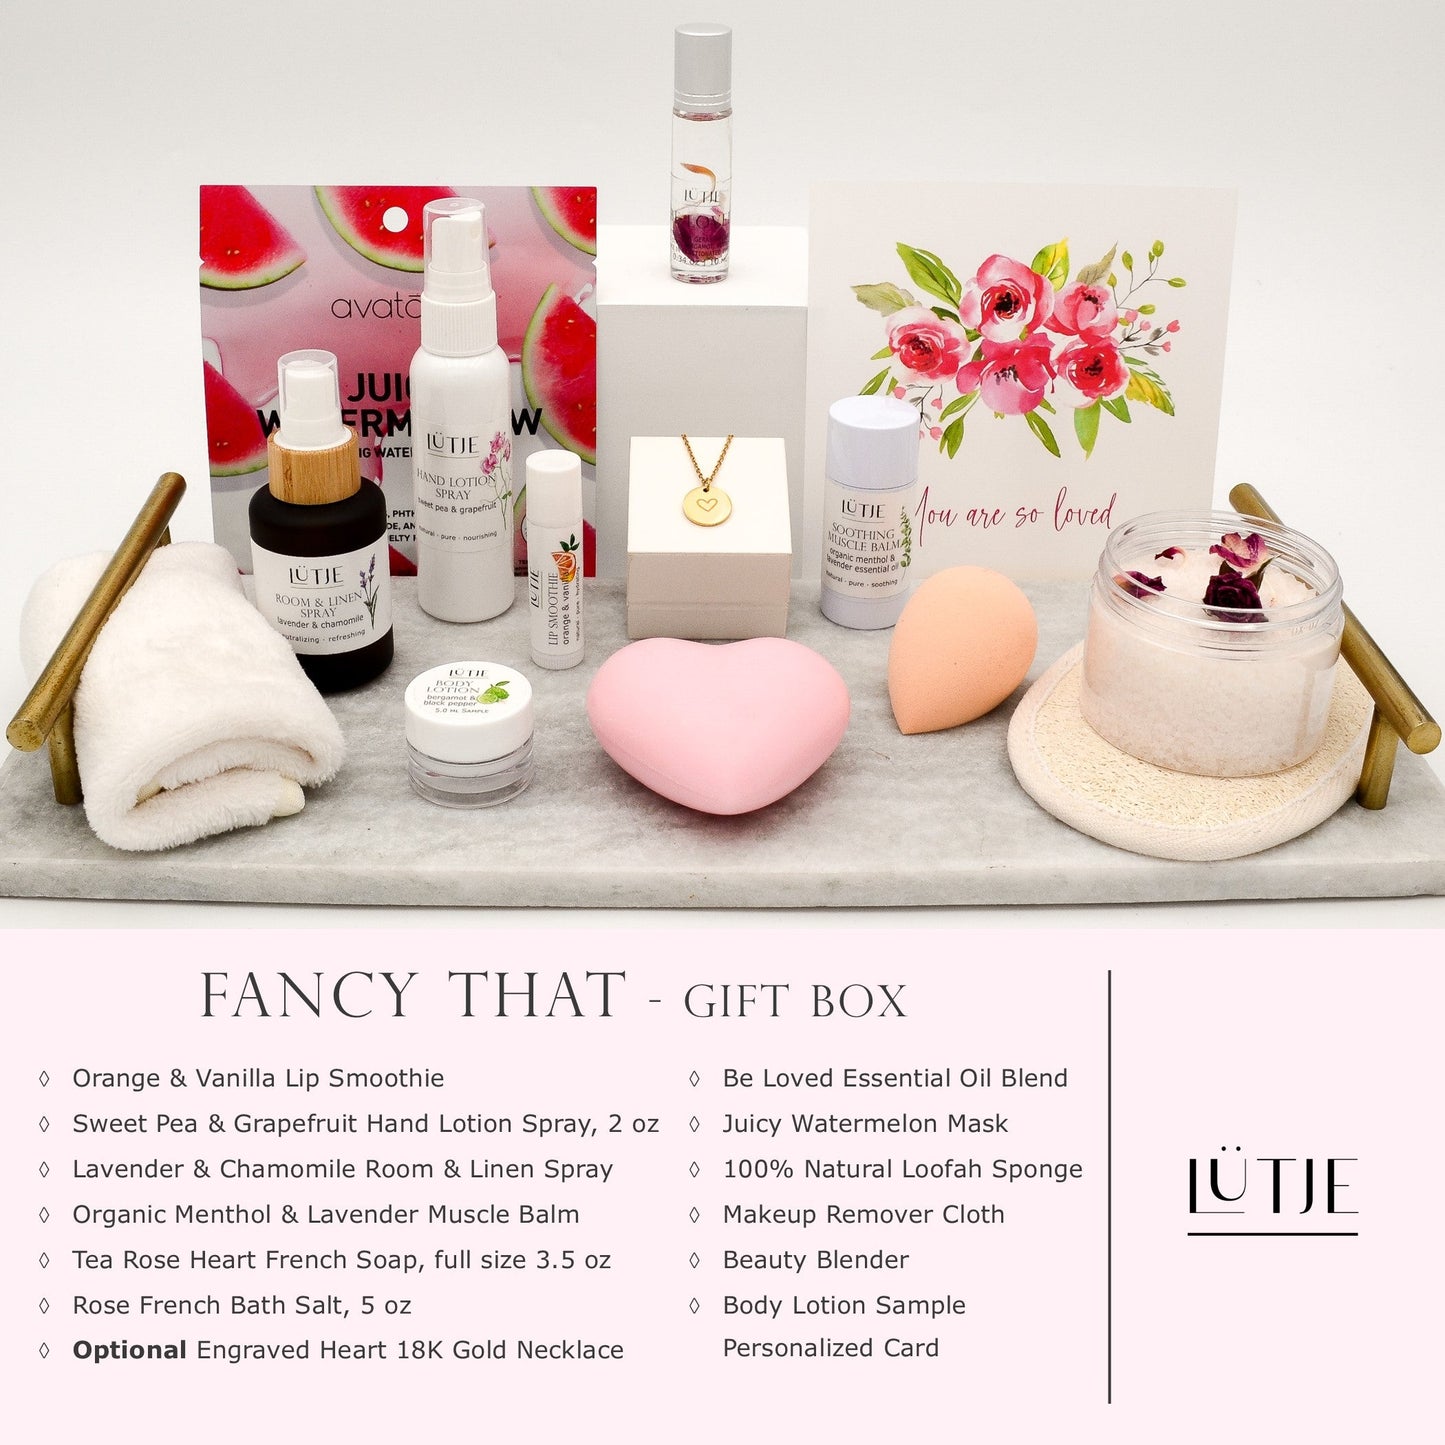 Fancy That Gift Box for women, BFF, wife, daughter, sister, mom, or grandma, includes Sweet Pea & Grapefruit hand lotion spray, essential oil, lip balm, soothing muscle balm, Lavender & Chamomile room & linen spray, French soap, French bath salts, hydrating face mask, other bath, spa and self-care items, and 18K gold-plated necklace with engraved heart.